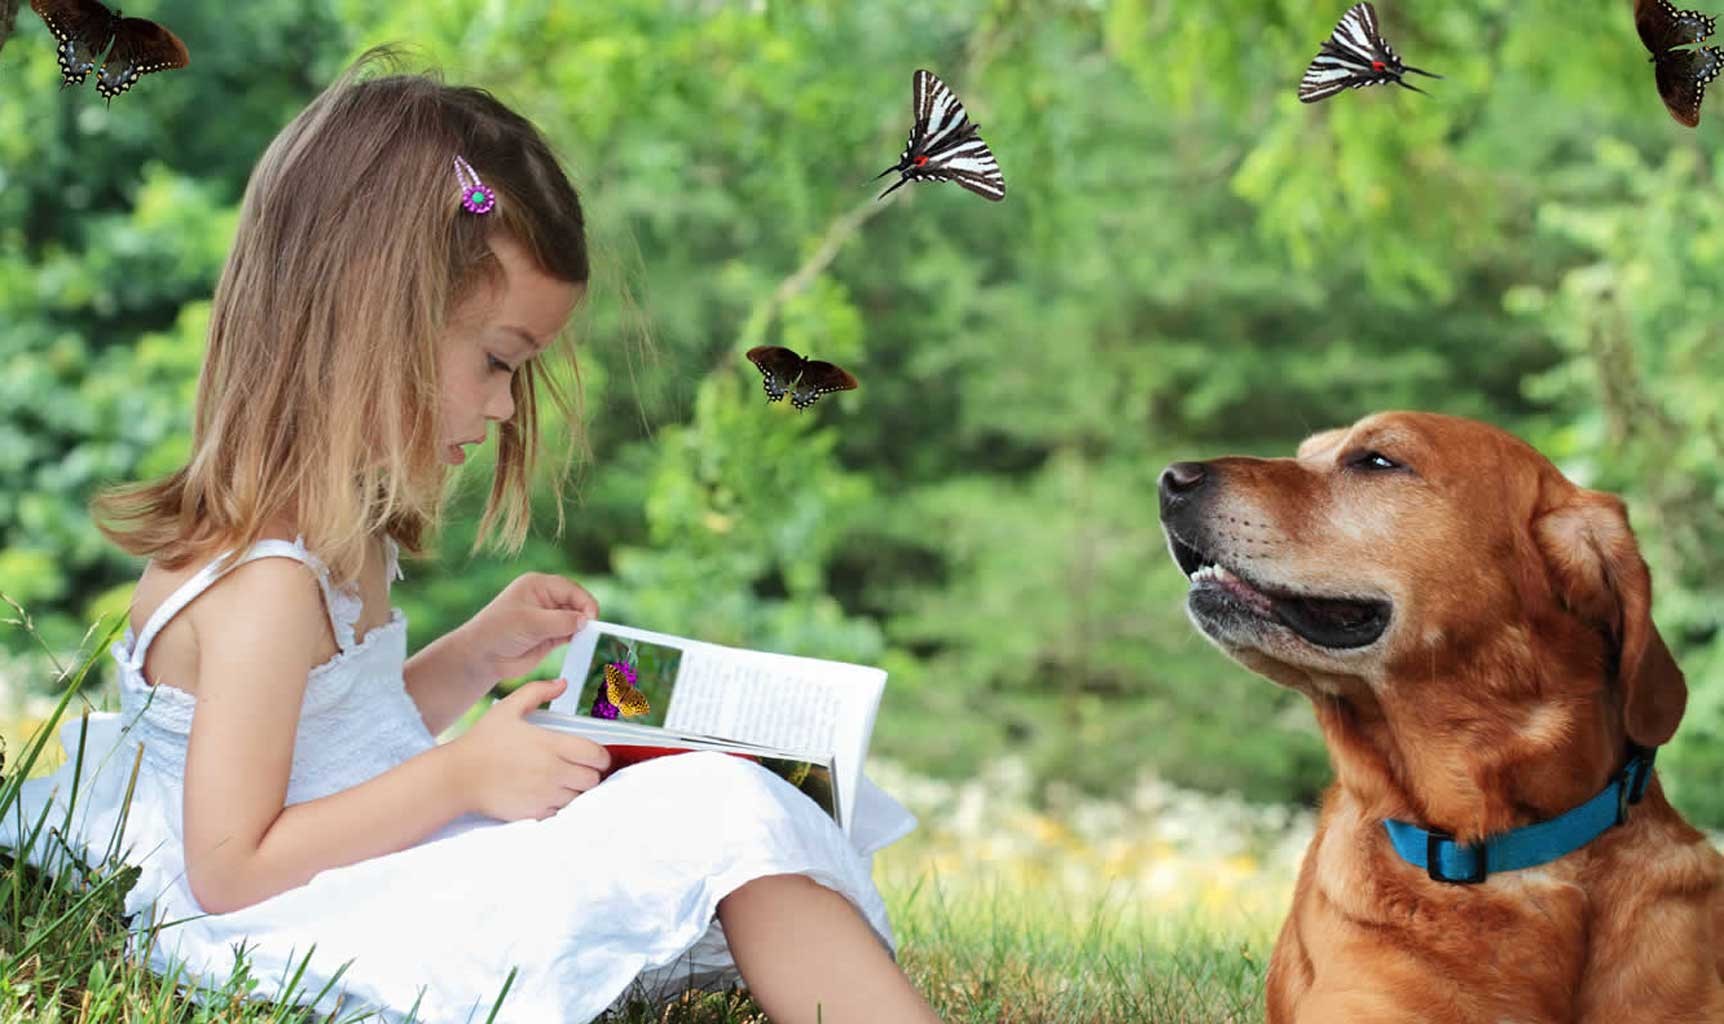 23 Pet Friend Poems - Poems on the Joys of Dogs, Cats & Animal Friends